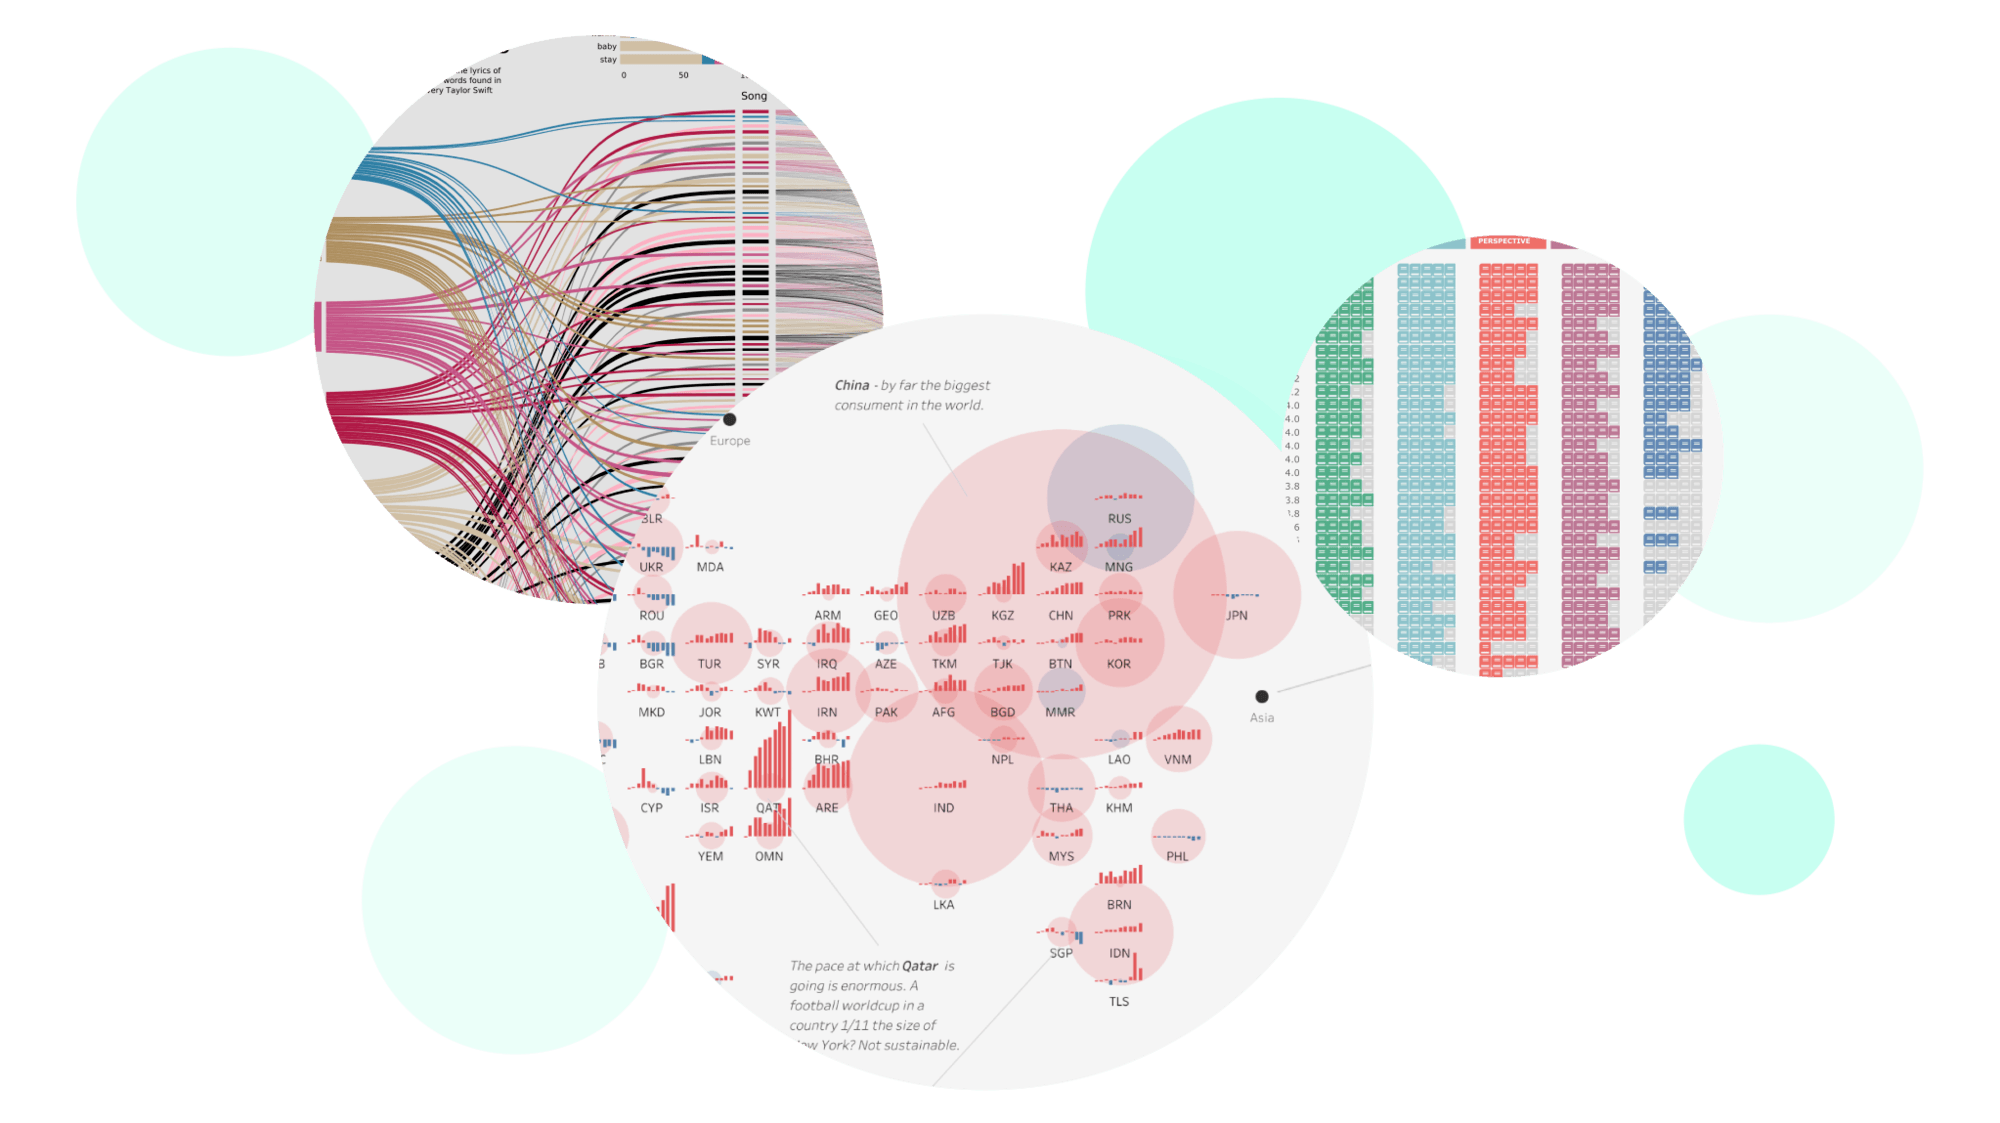 Collage of Visualizations from Tableau Public